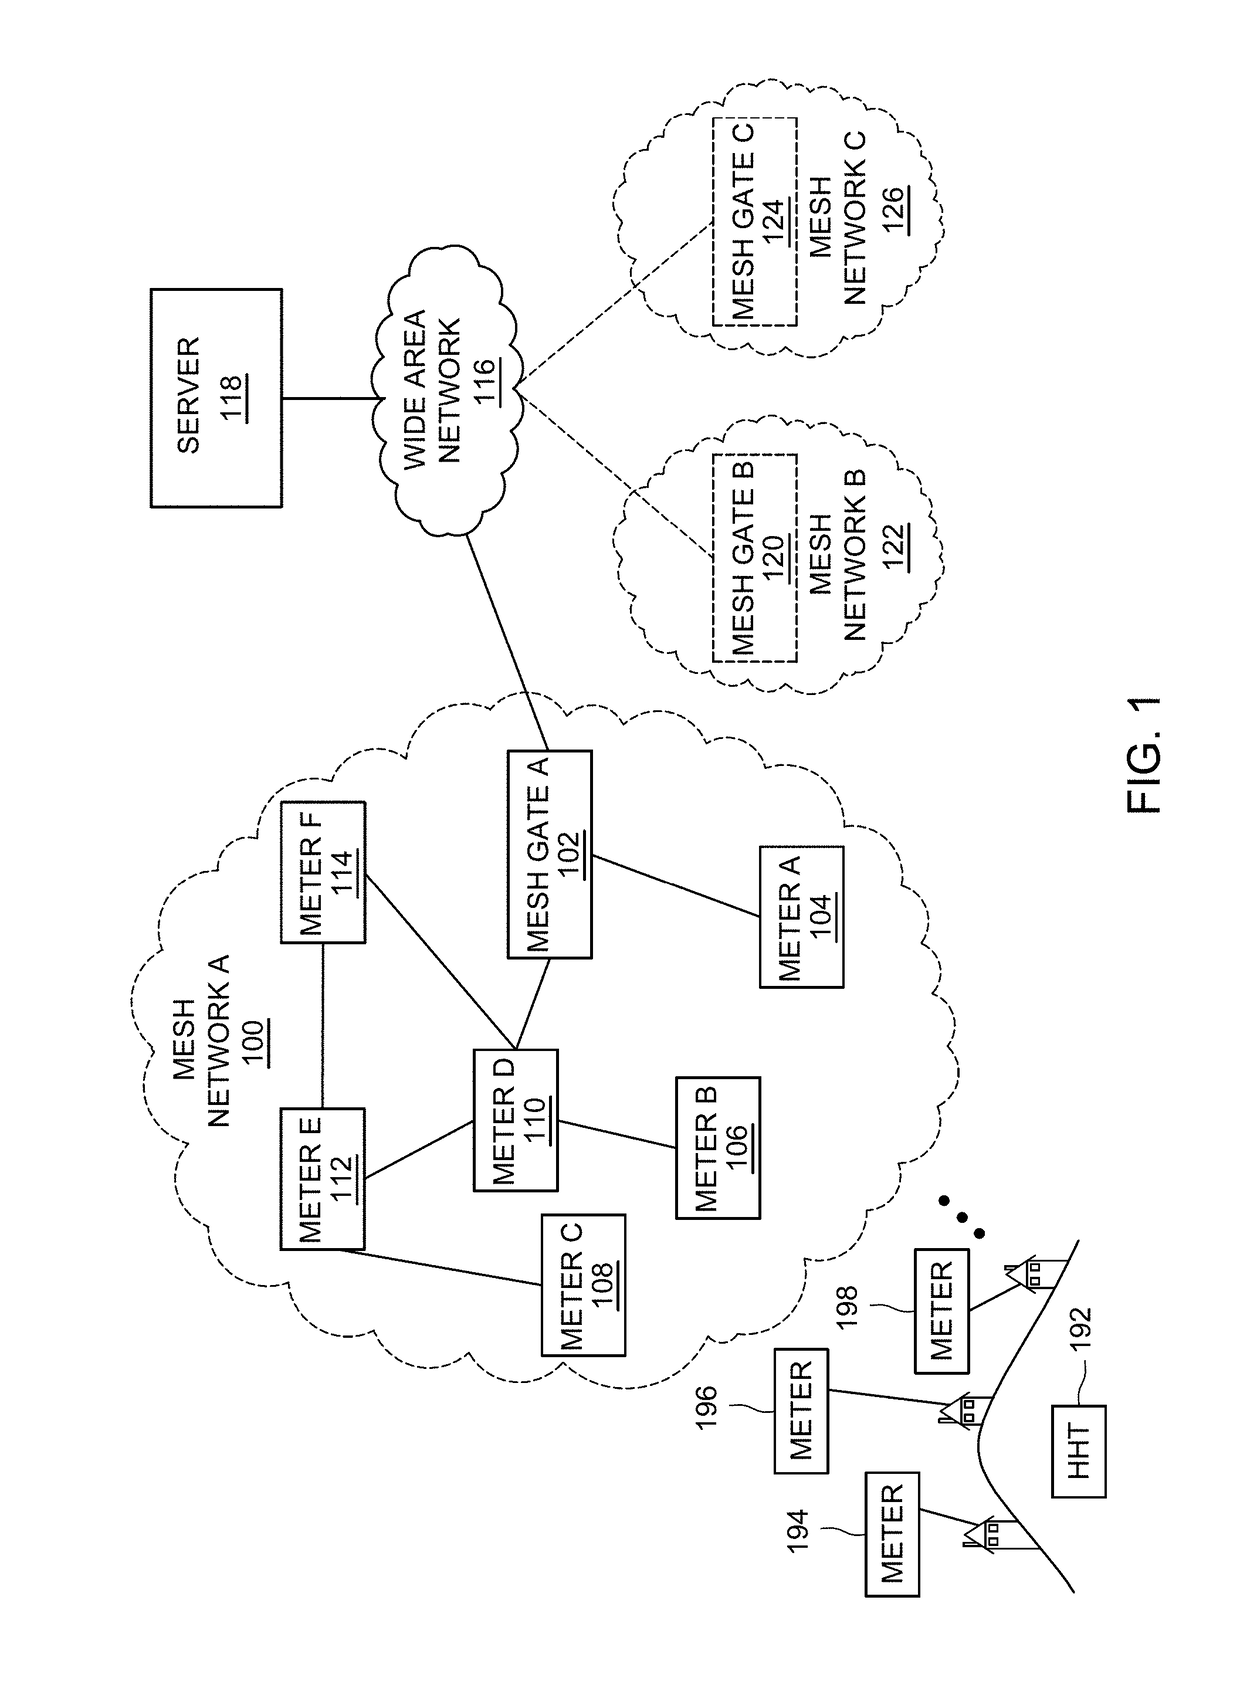 Method and system for hand held terminal security